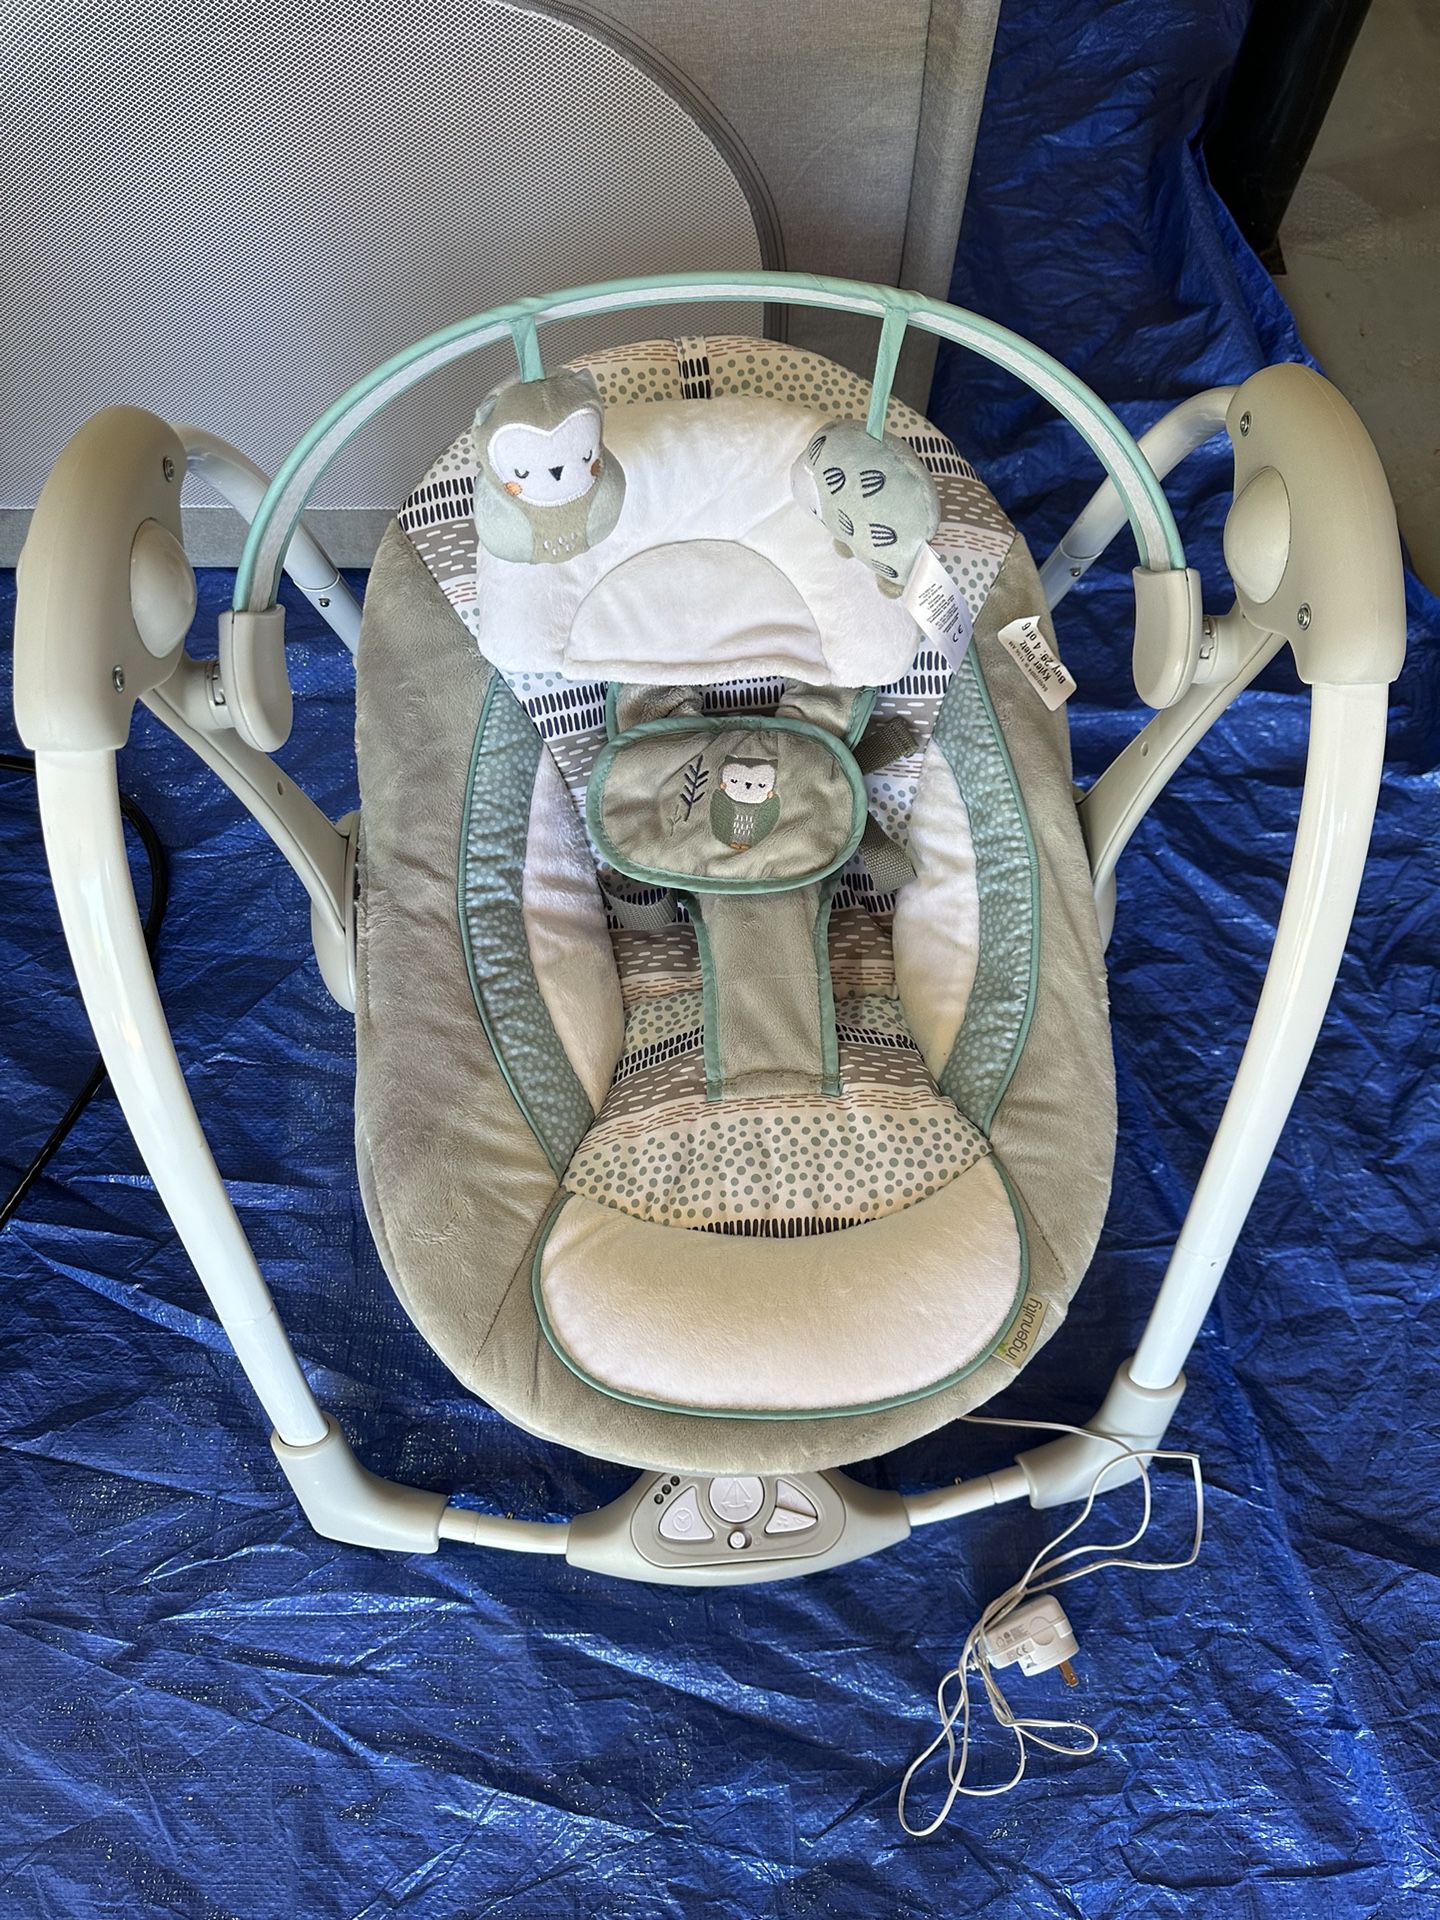 Clean Baby Swing - Blue And White Owls $50 OBO